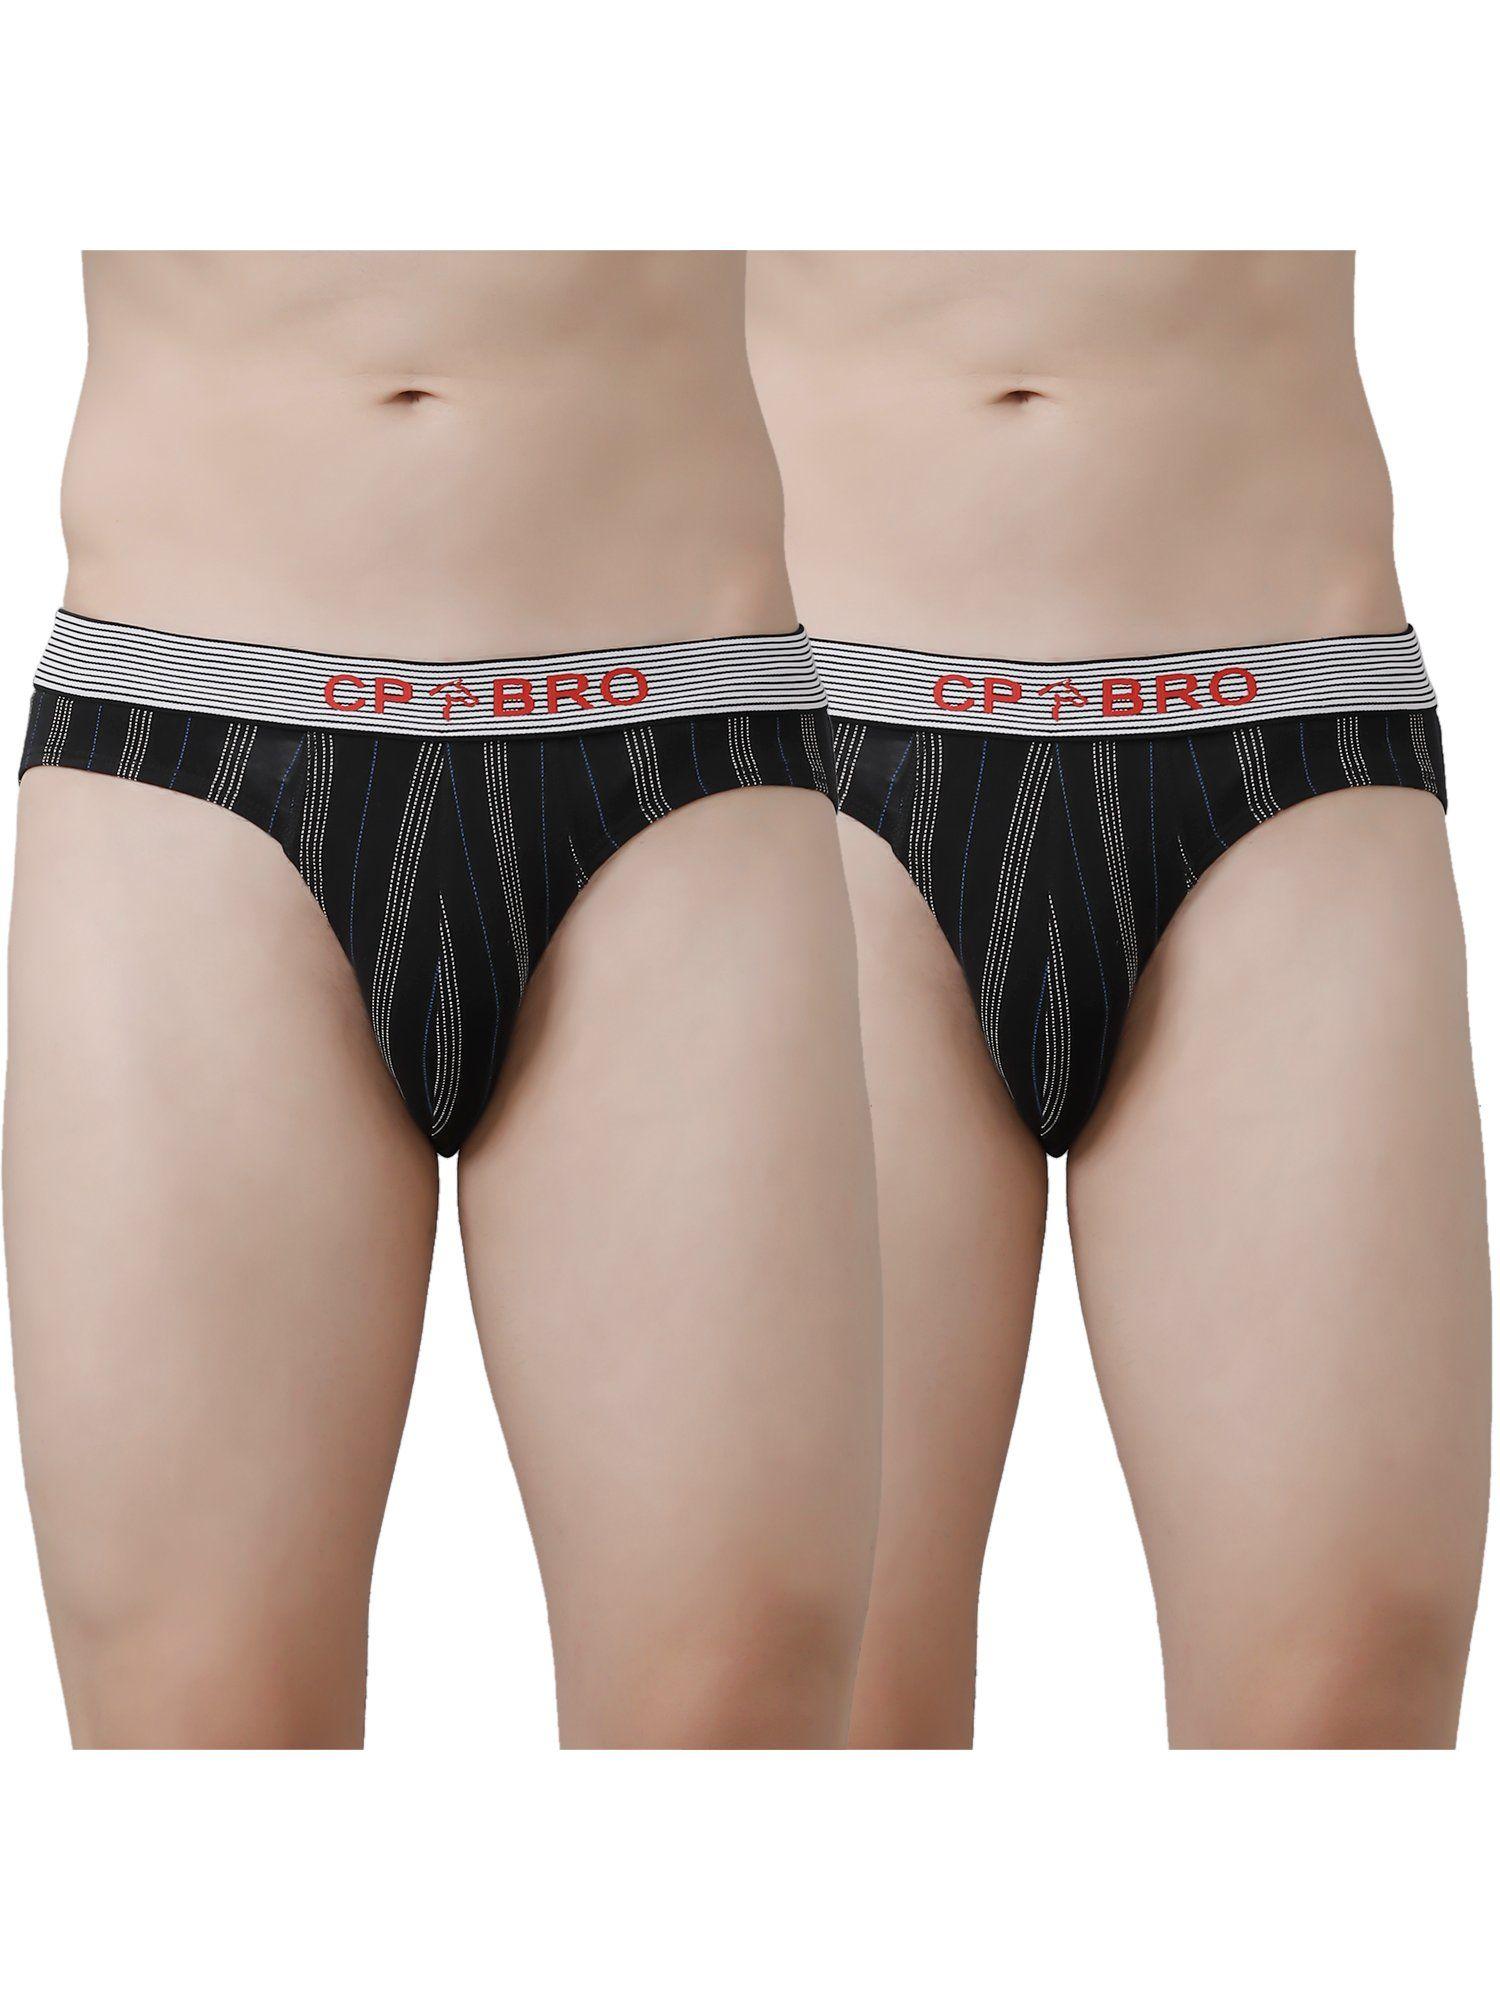 printed briefs with exposed waistband value - black stripe (pack of 2)